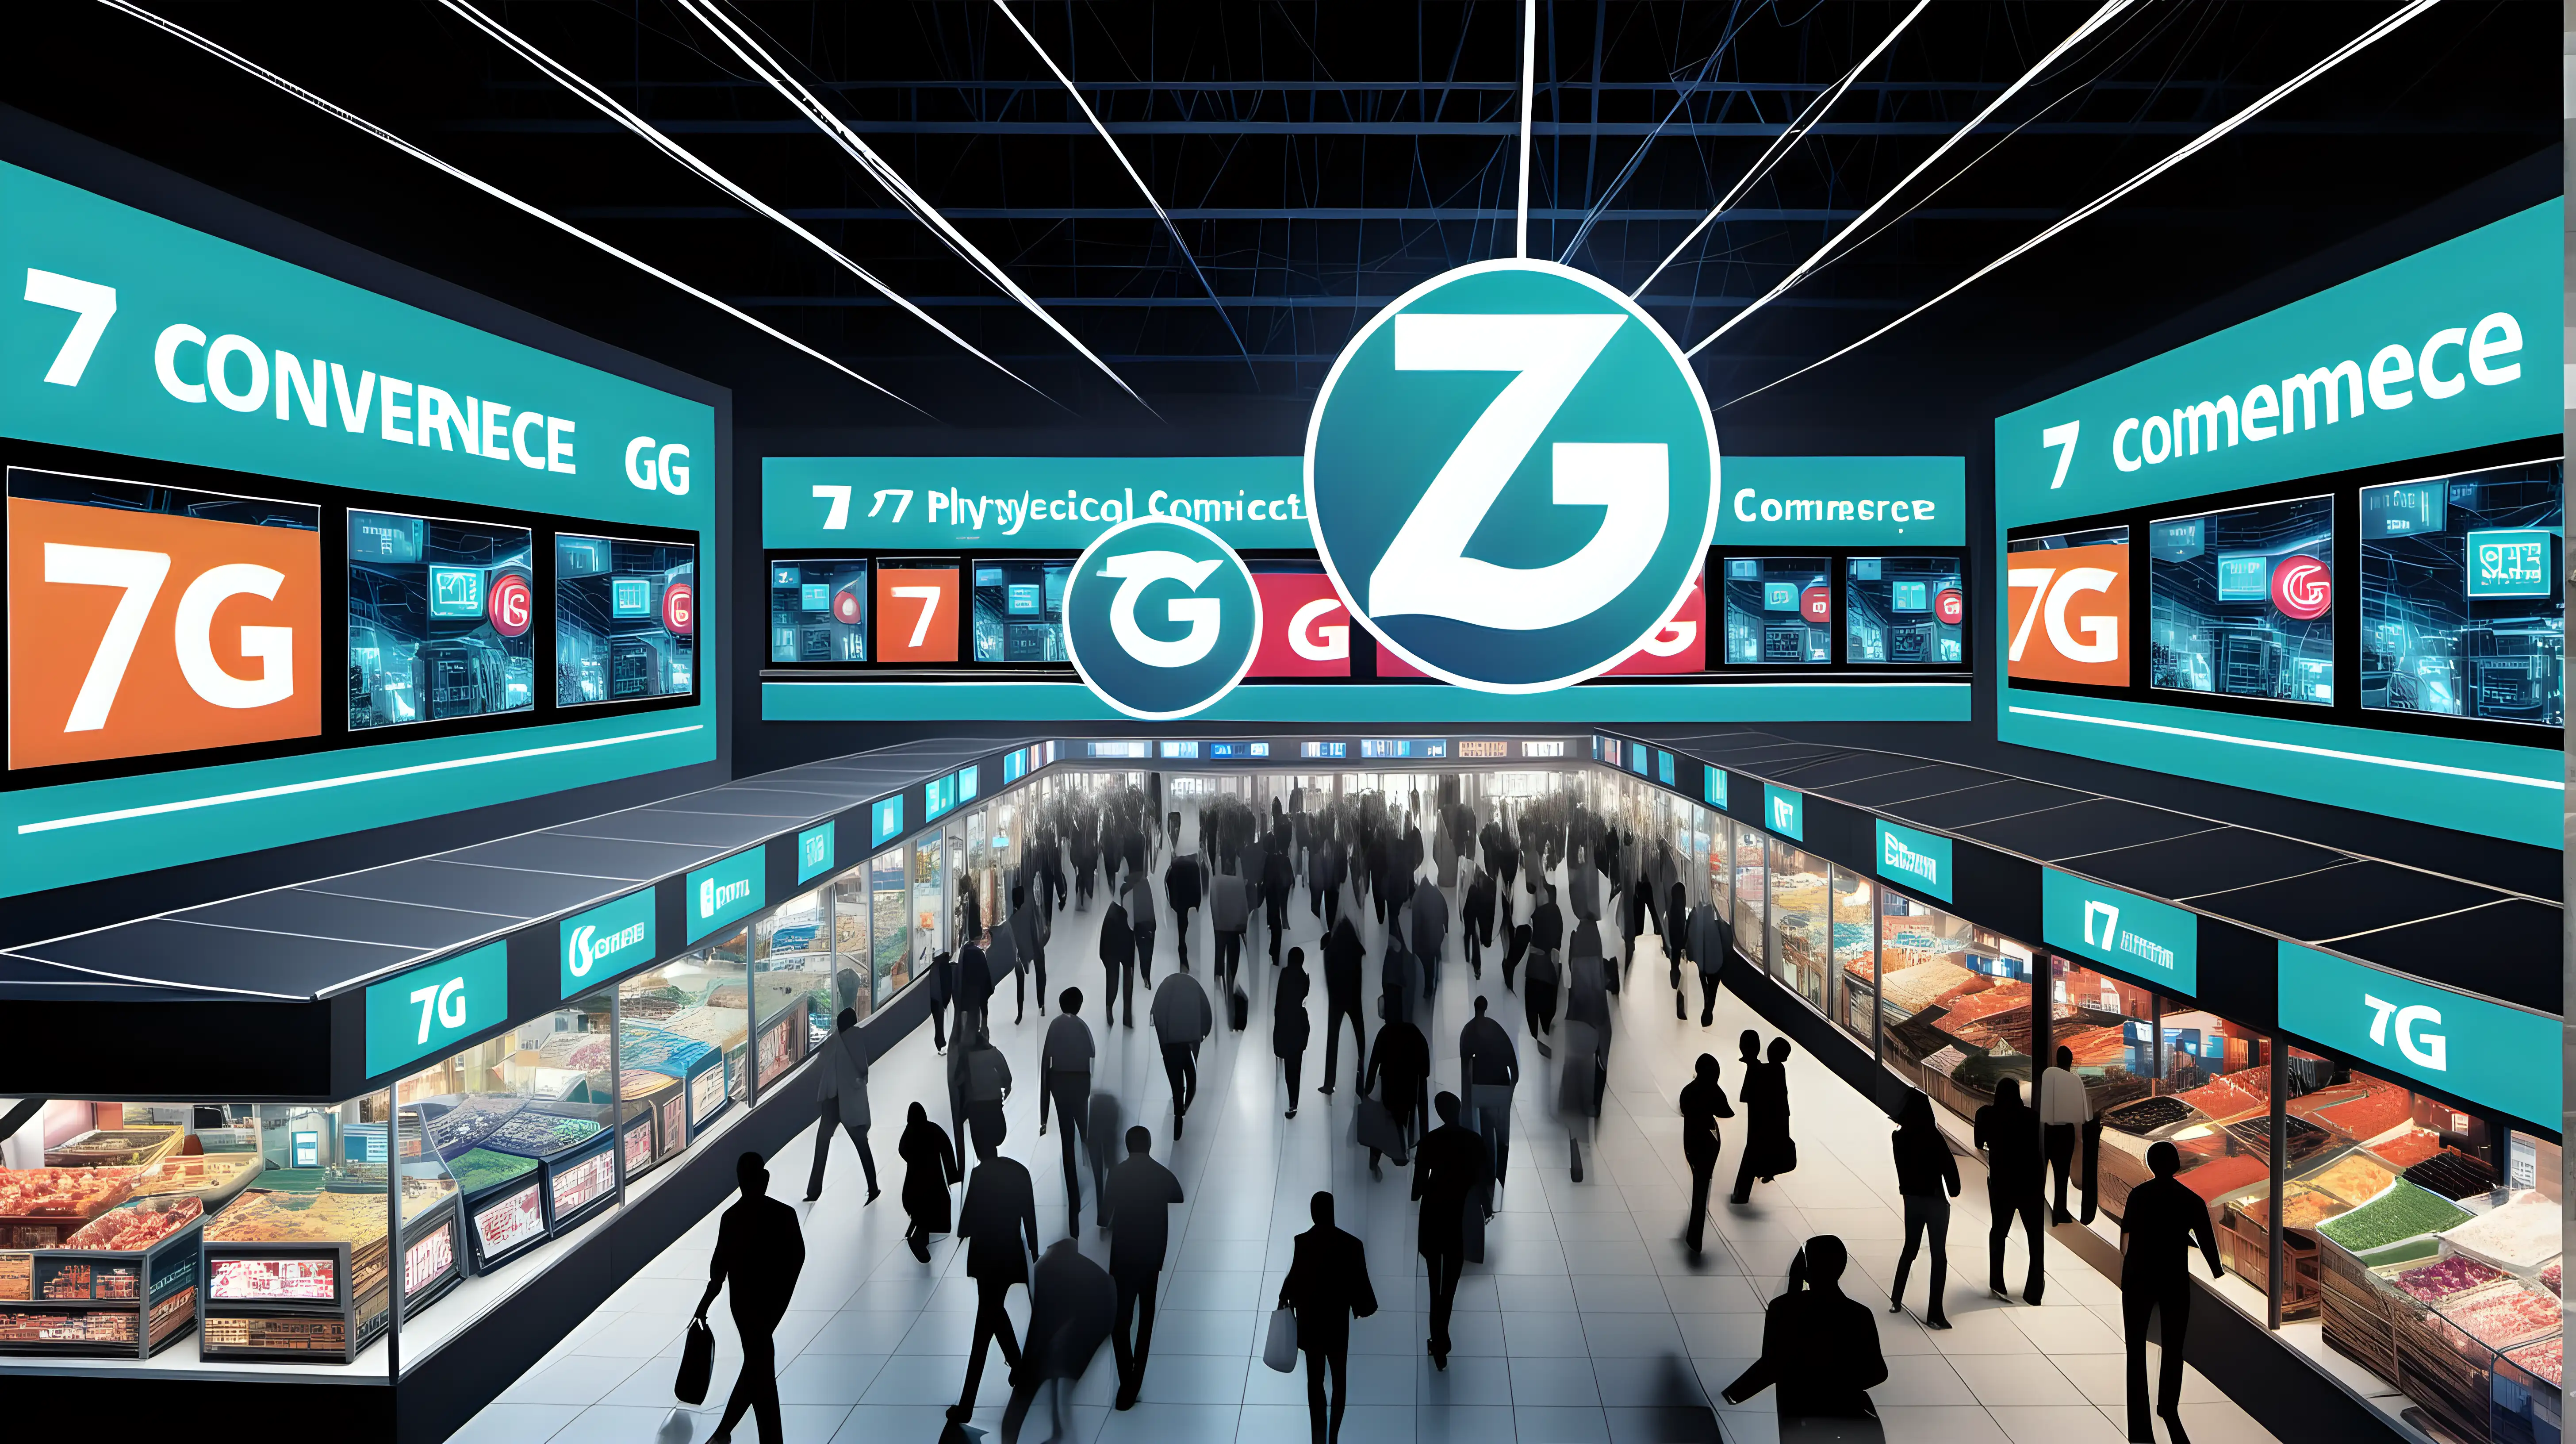 Illustrate an image of a bustling marketplace with digital screens displaying the "7G" logo, showcasing the convergence of physical and digital commerce enabled by advanced connectivity.